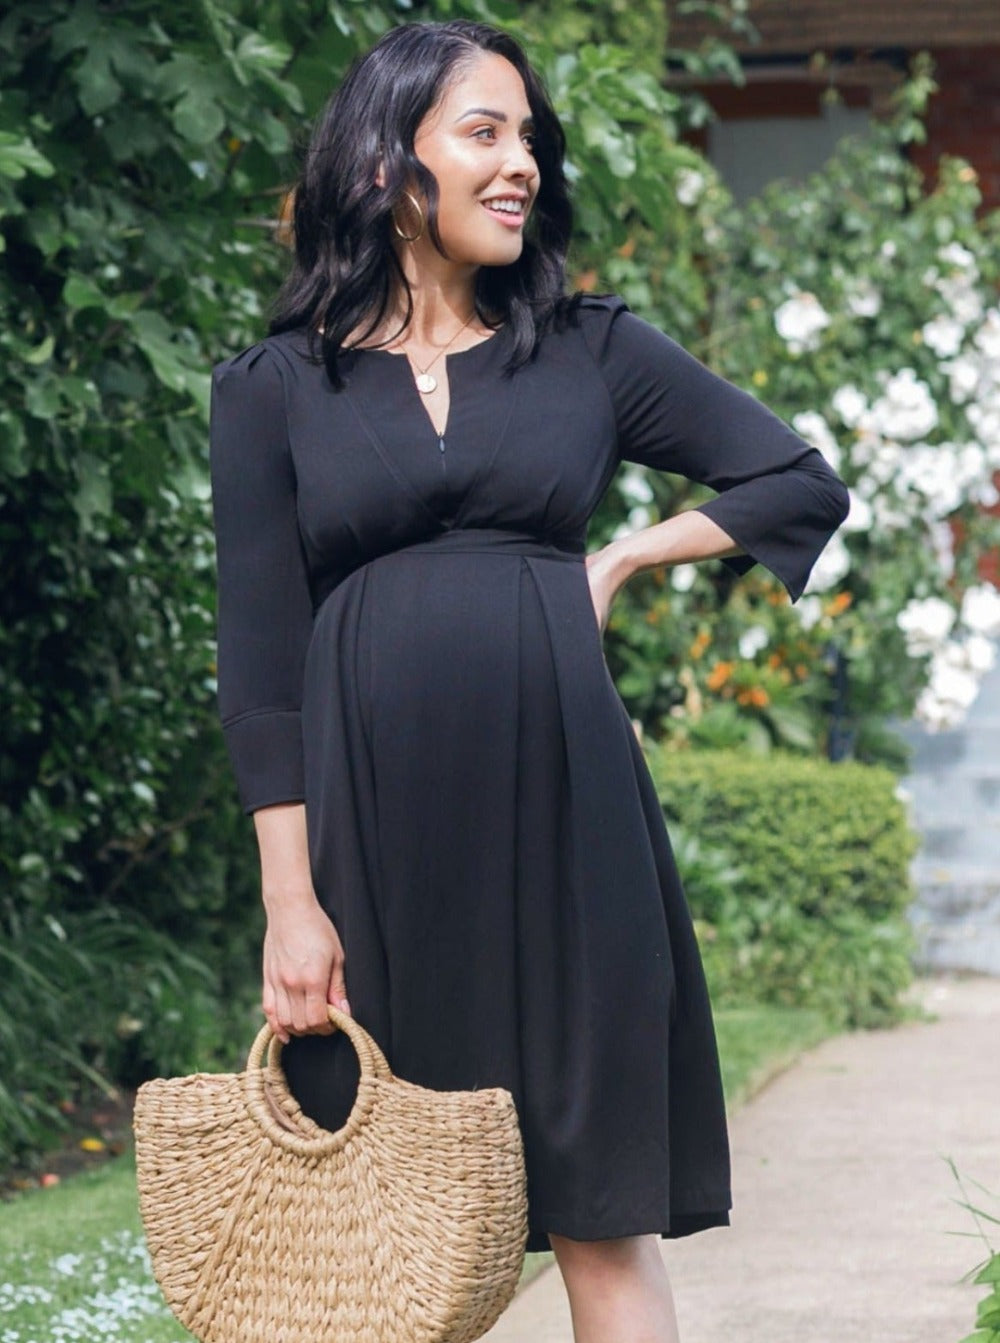 Black maternity and breastfeeding dress by MARION. Sustainable TENCEL empire waist style with deep pockets and full feminine skirt. Breastfeeding friendly with 3/4 sleeves and elegant cuff detail. Petite sizing also available.